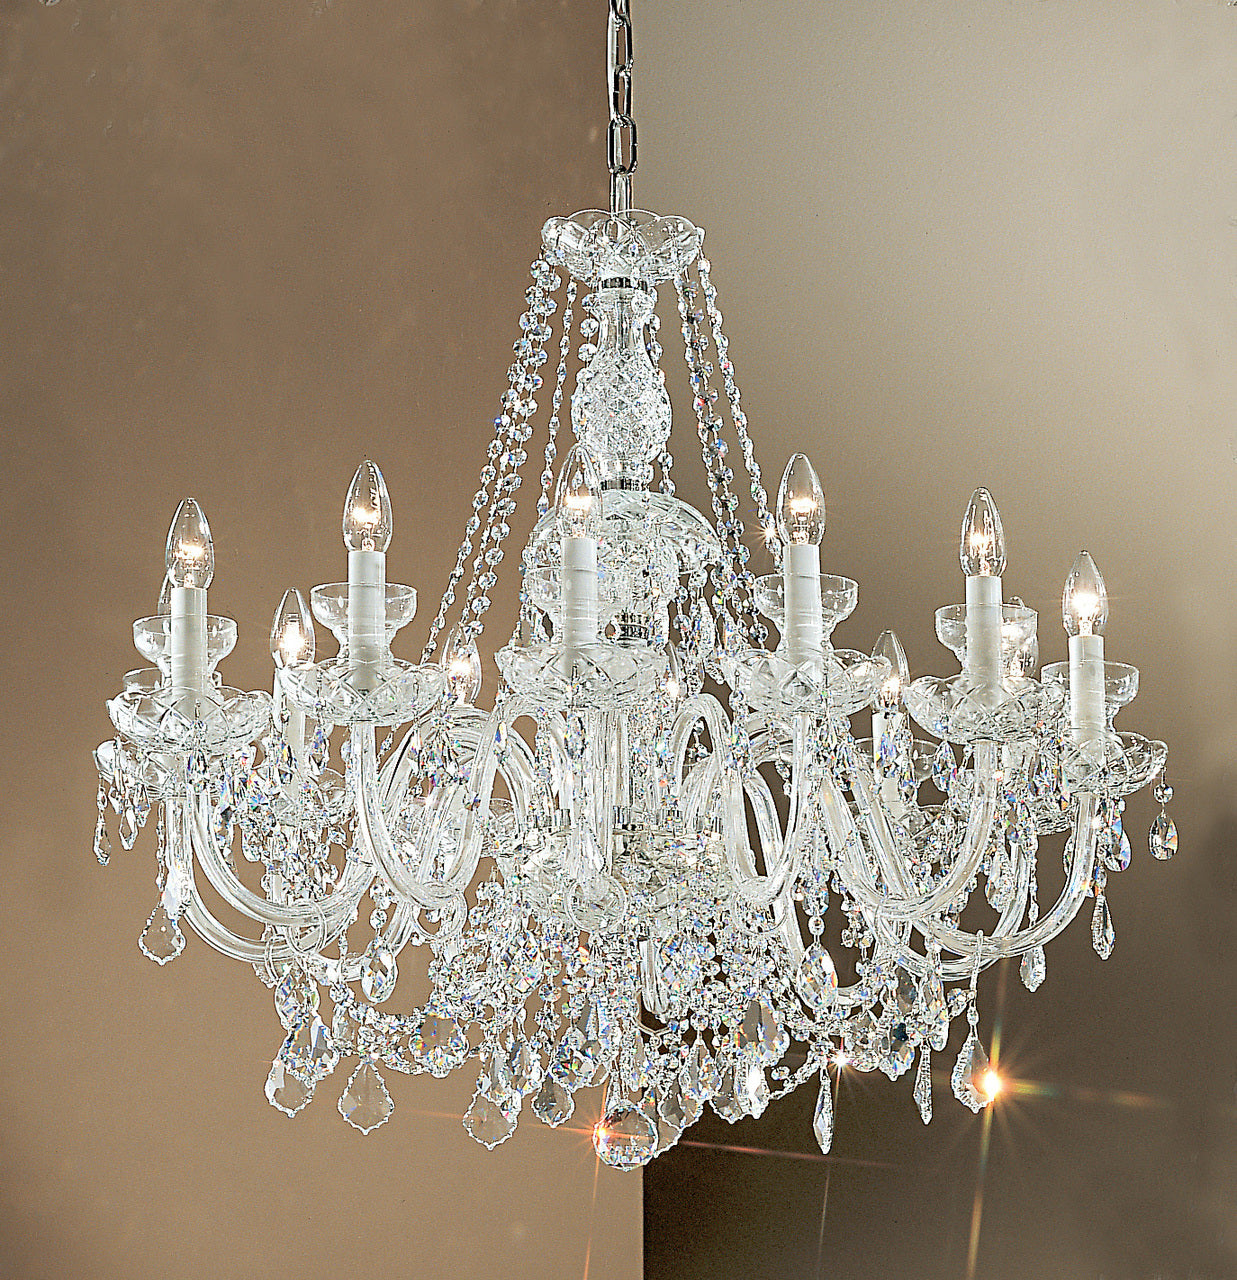 Classic Lighting 8276 CH S Bohemia Crystal/Glass Chandelier in Chrome (Imported from Italy)